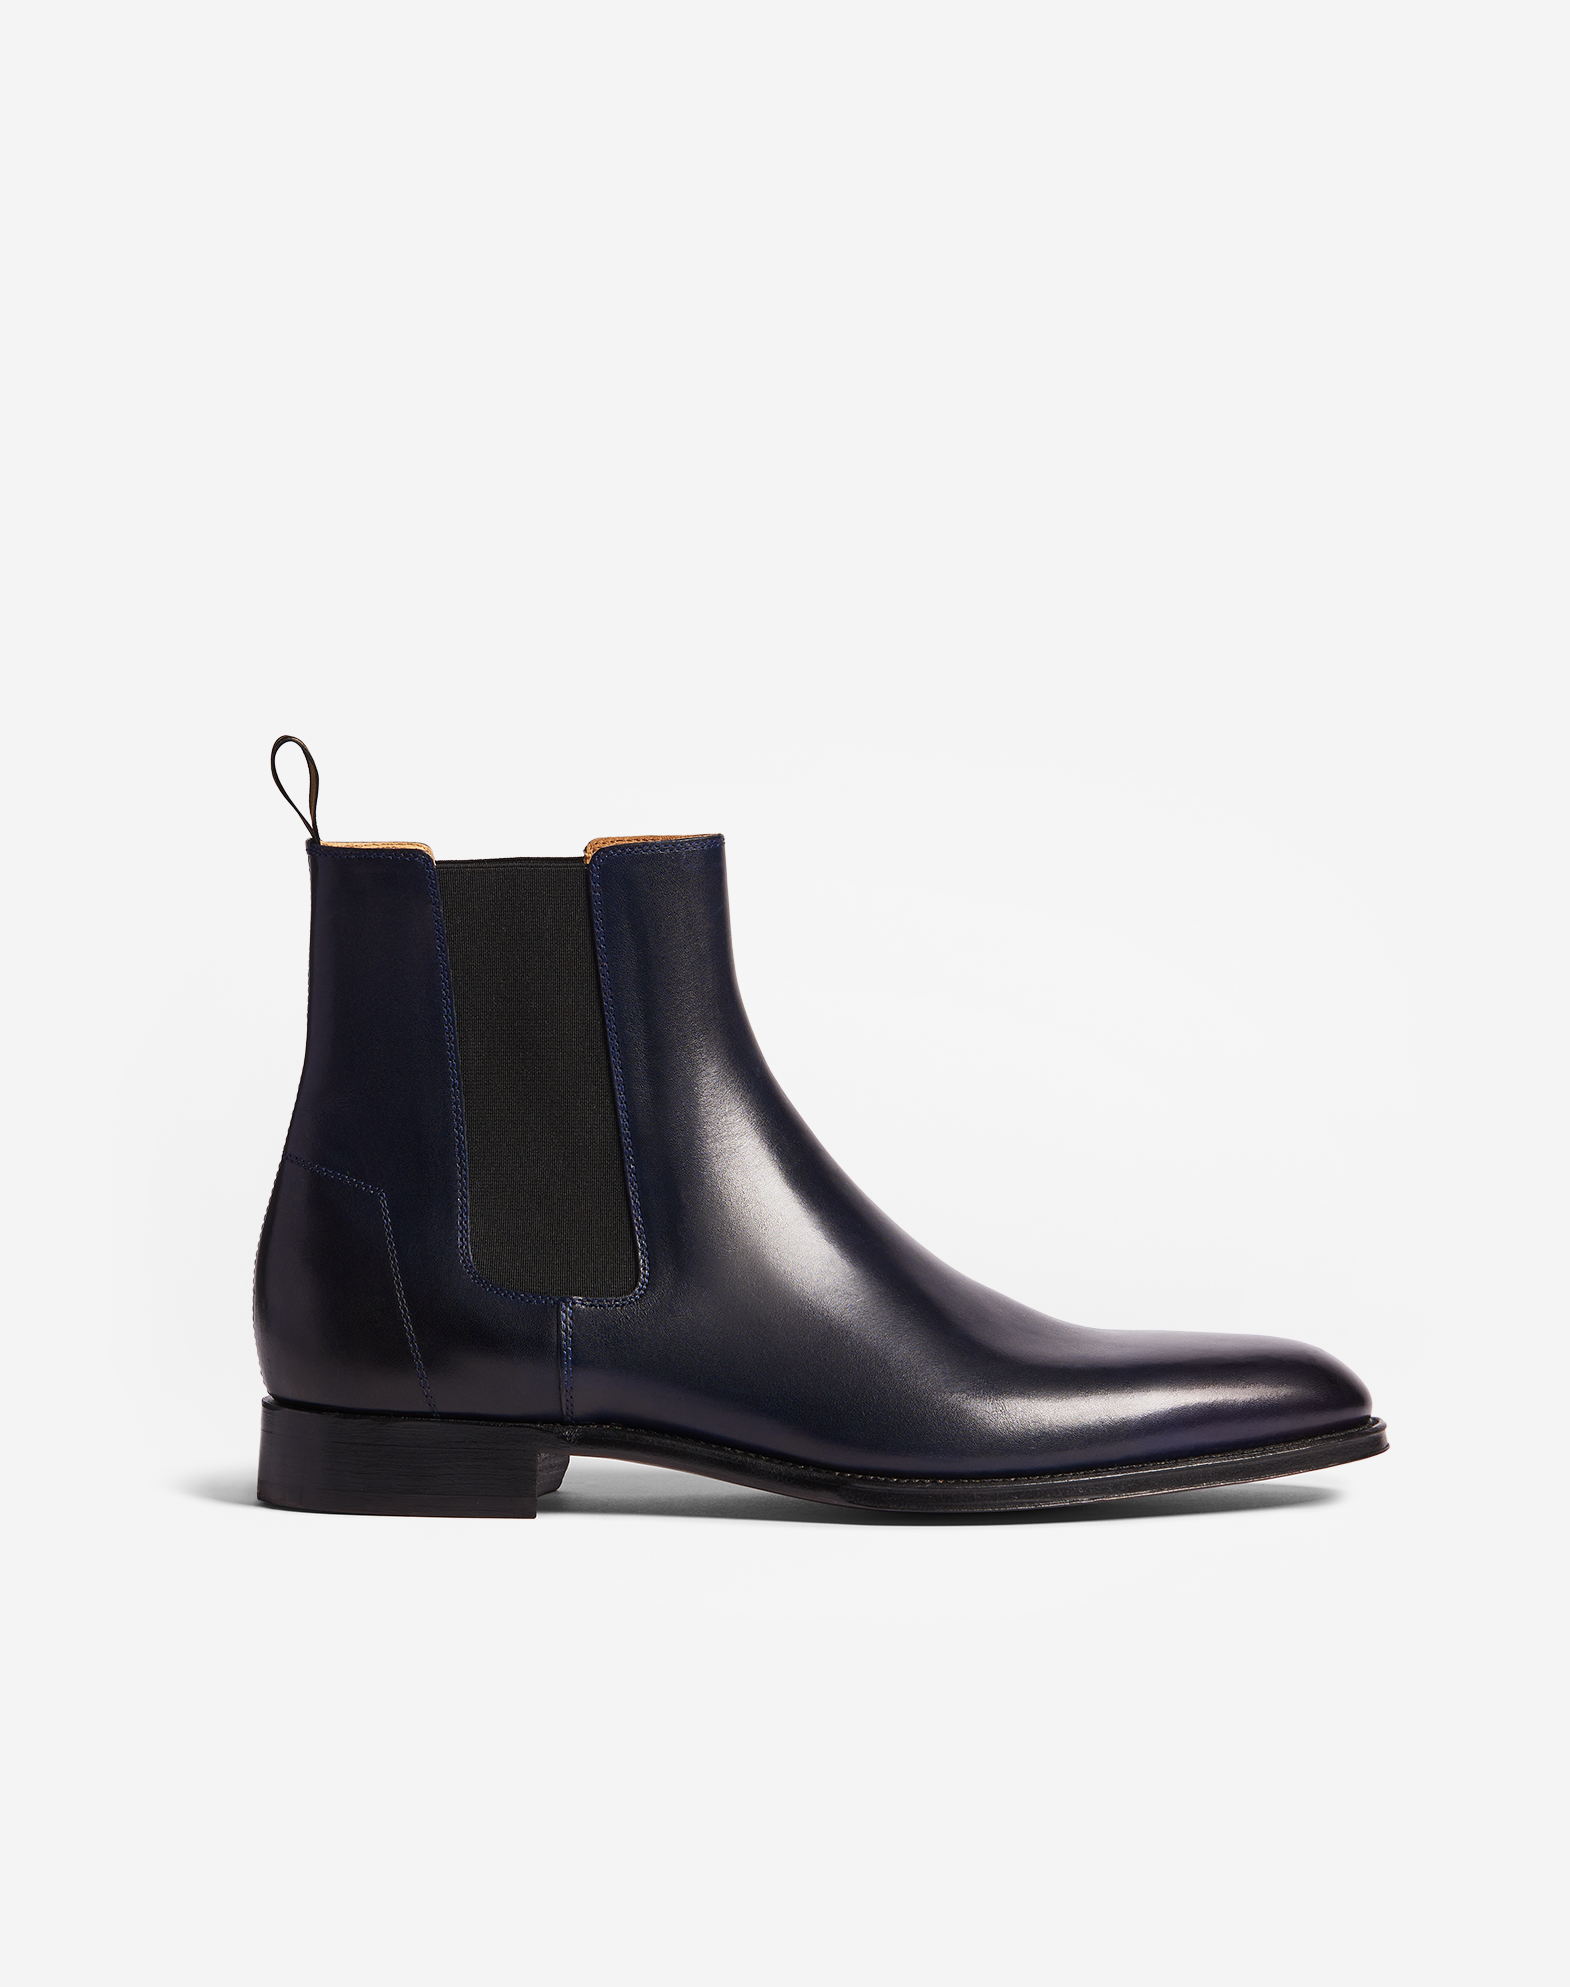 Dunhill Luxury Men's Boots